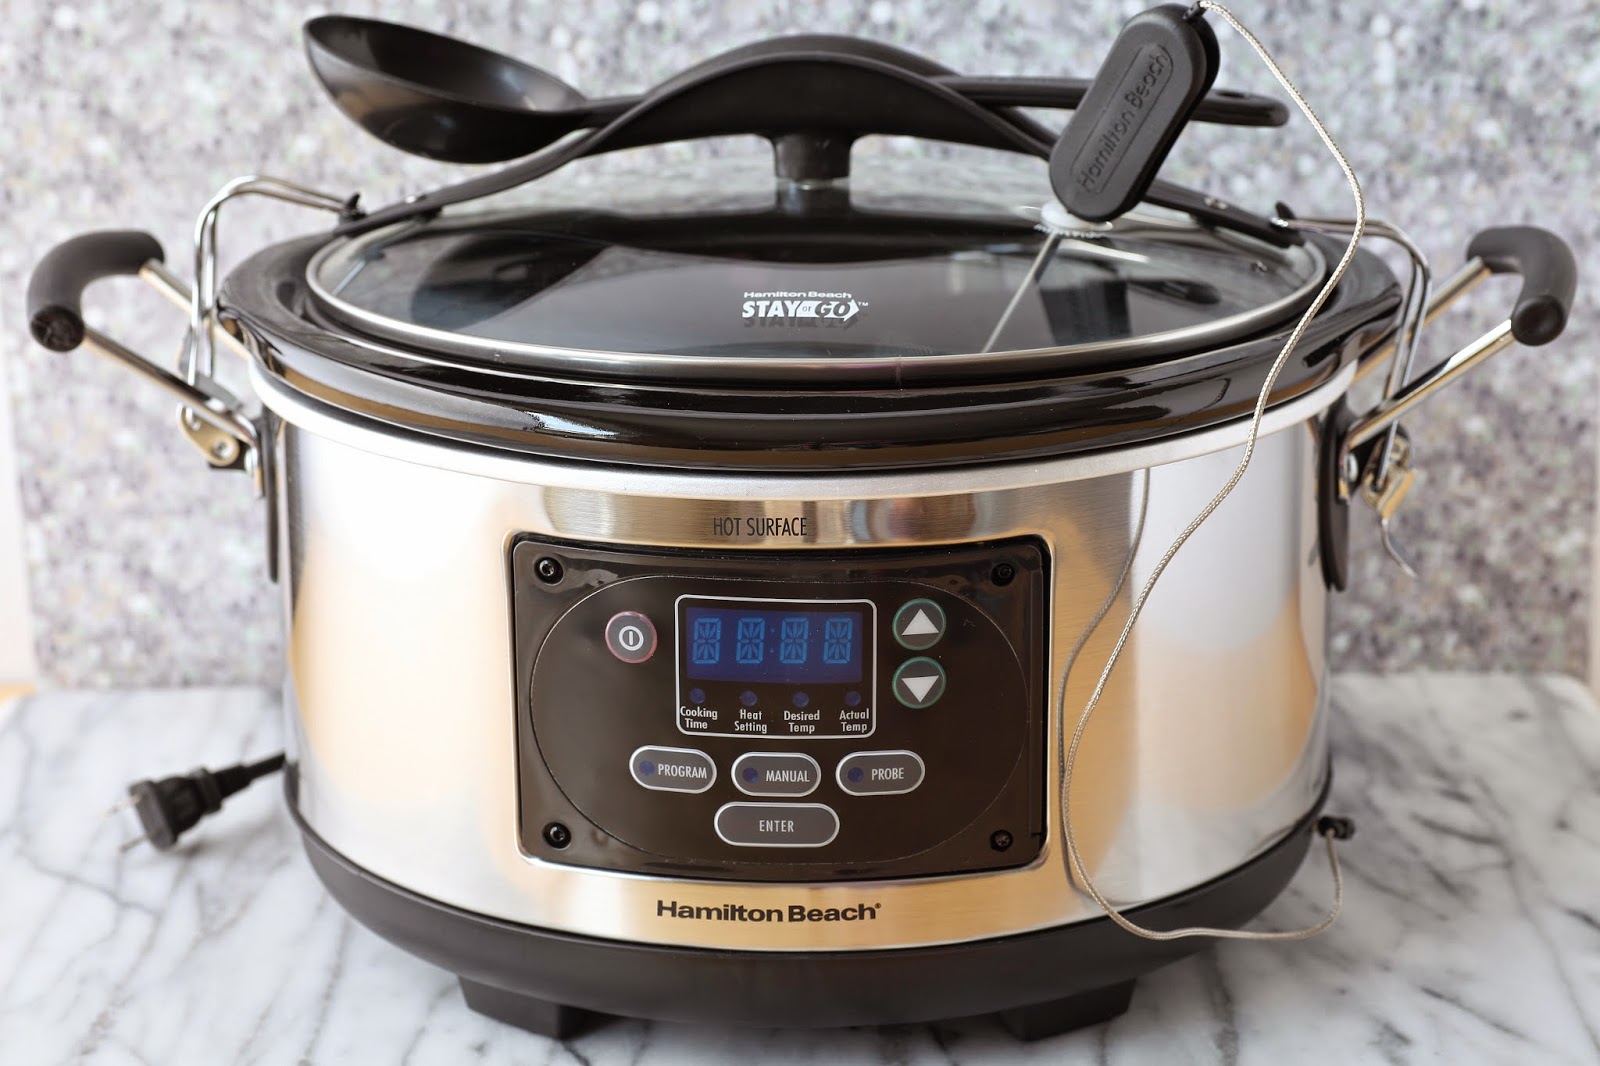 My go-to slow cooker: Hamilton Beach Slow Cooker Review